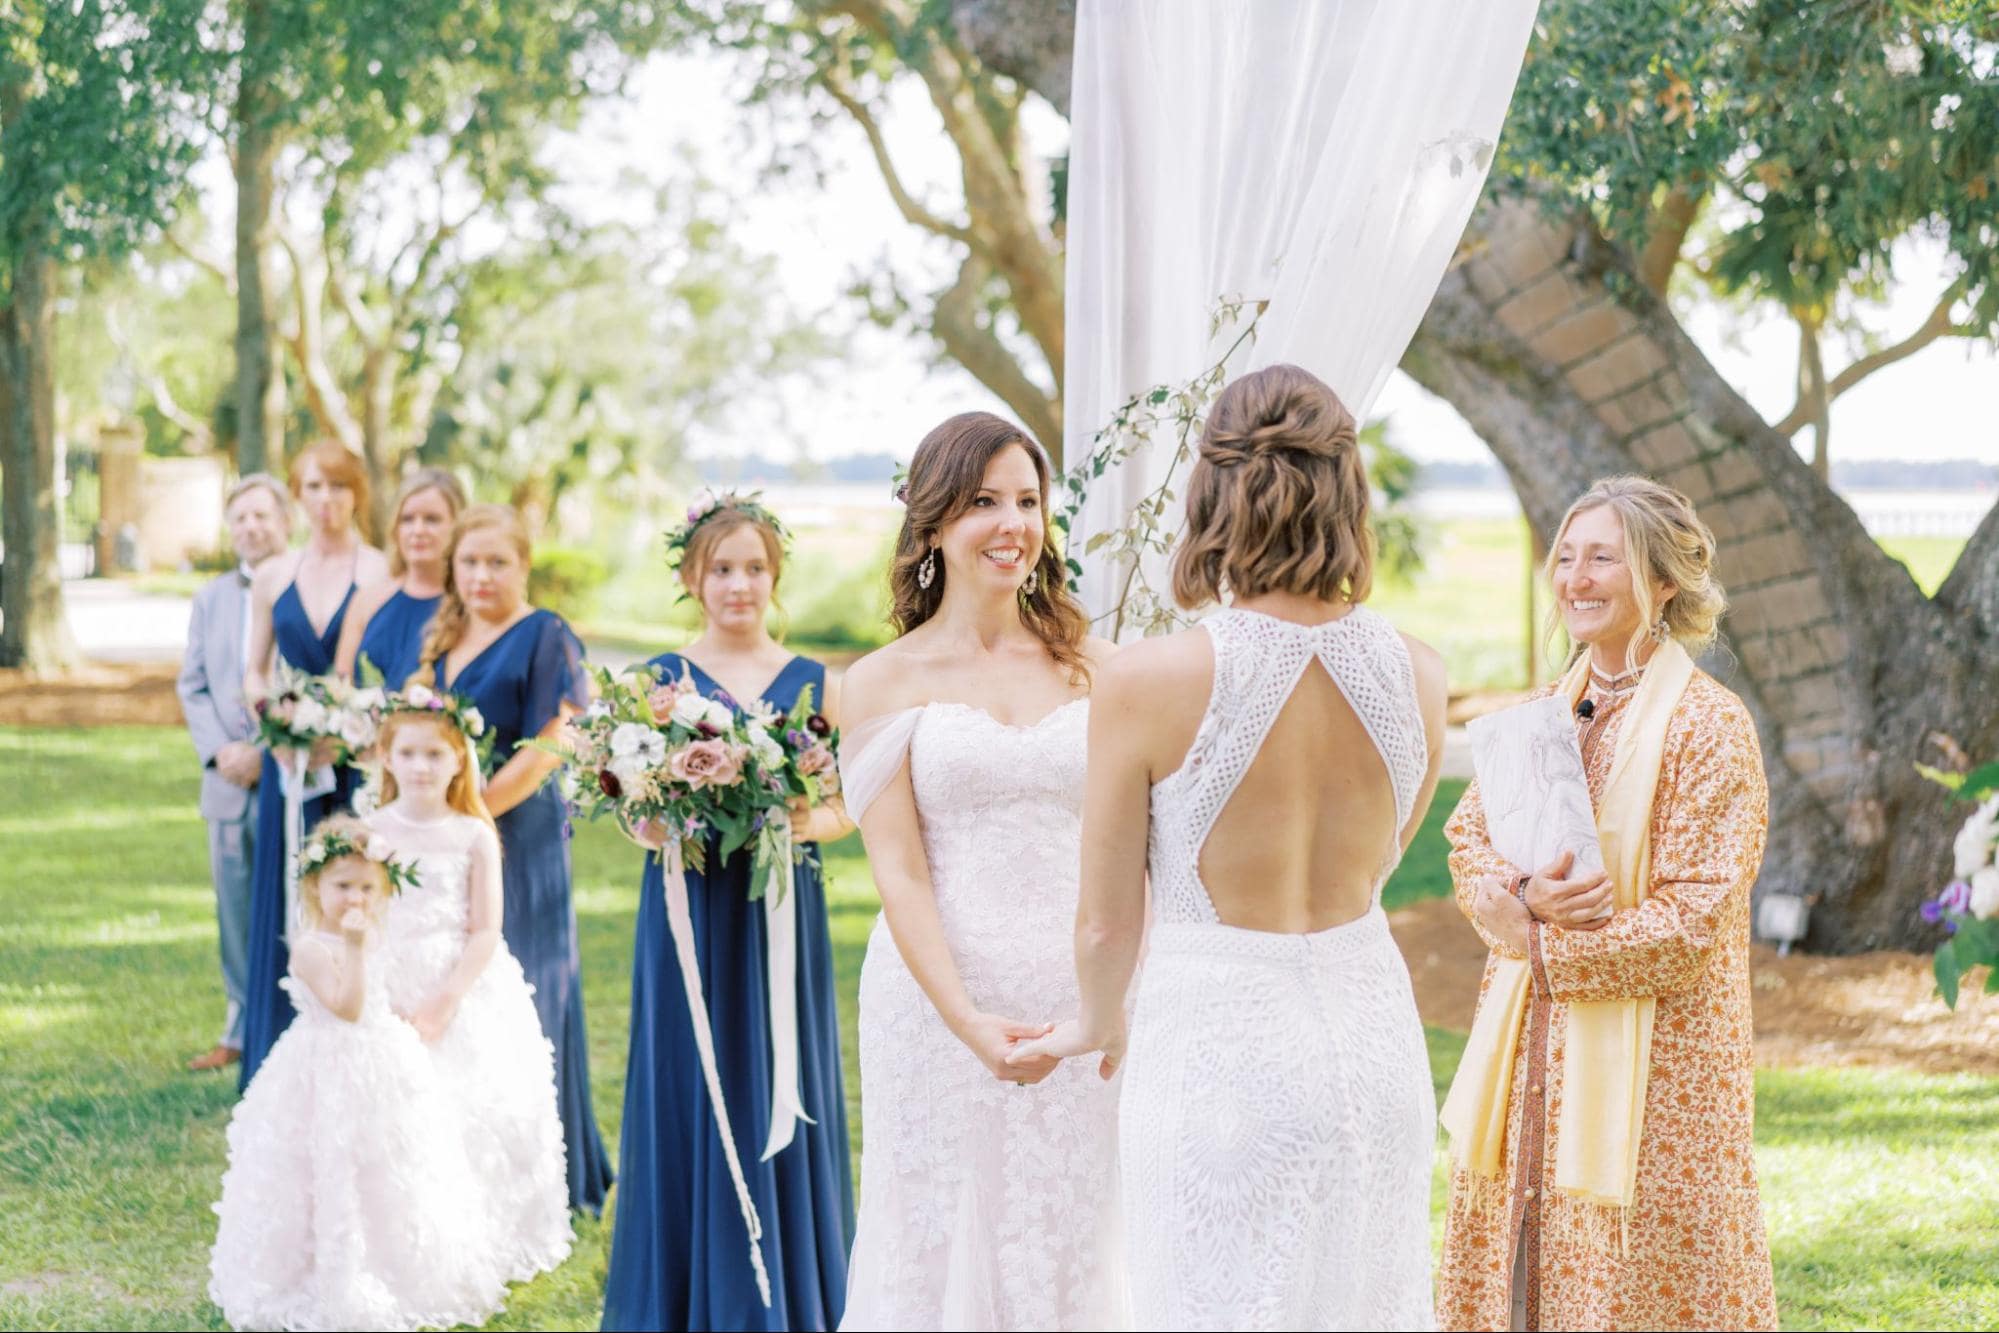 The Pros and Cons of a Summer Wedding